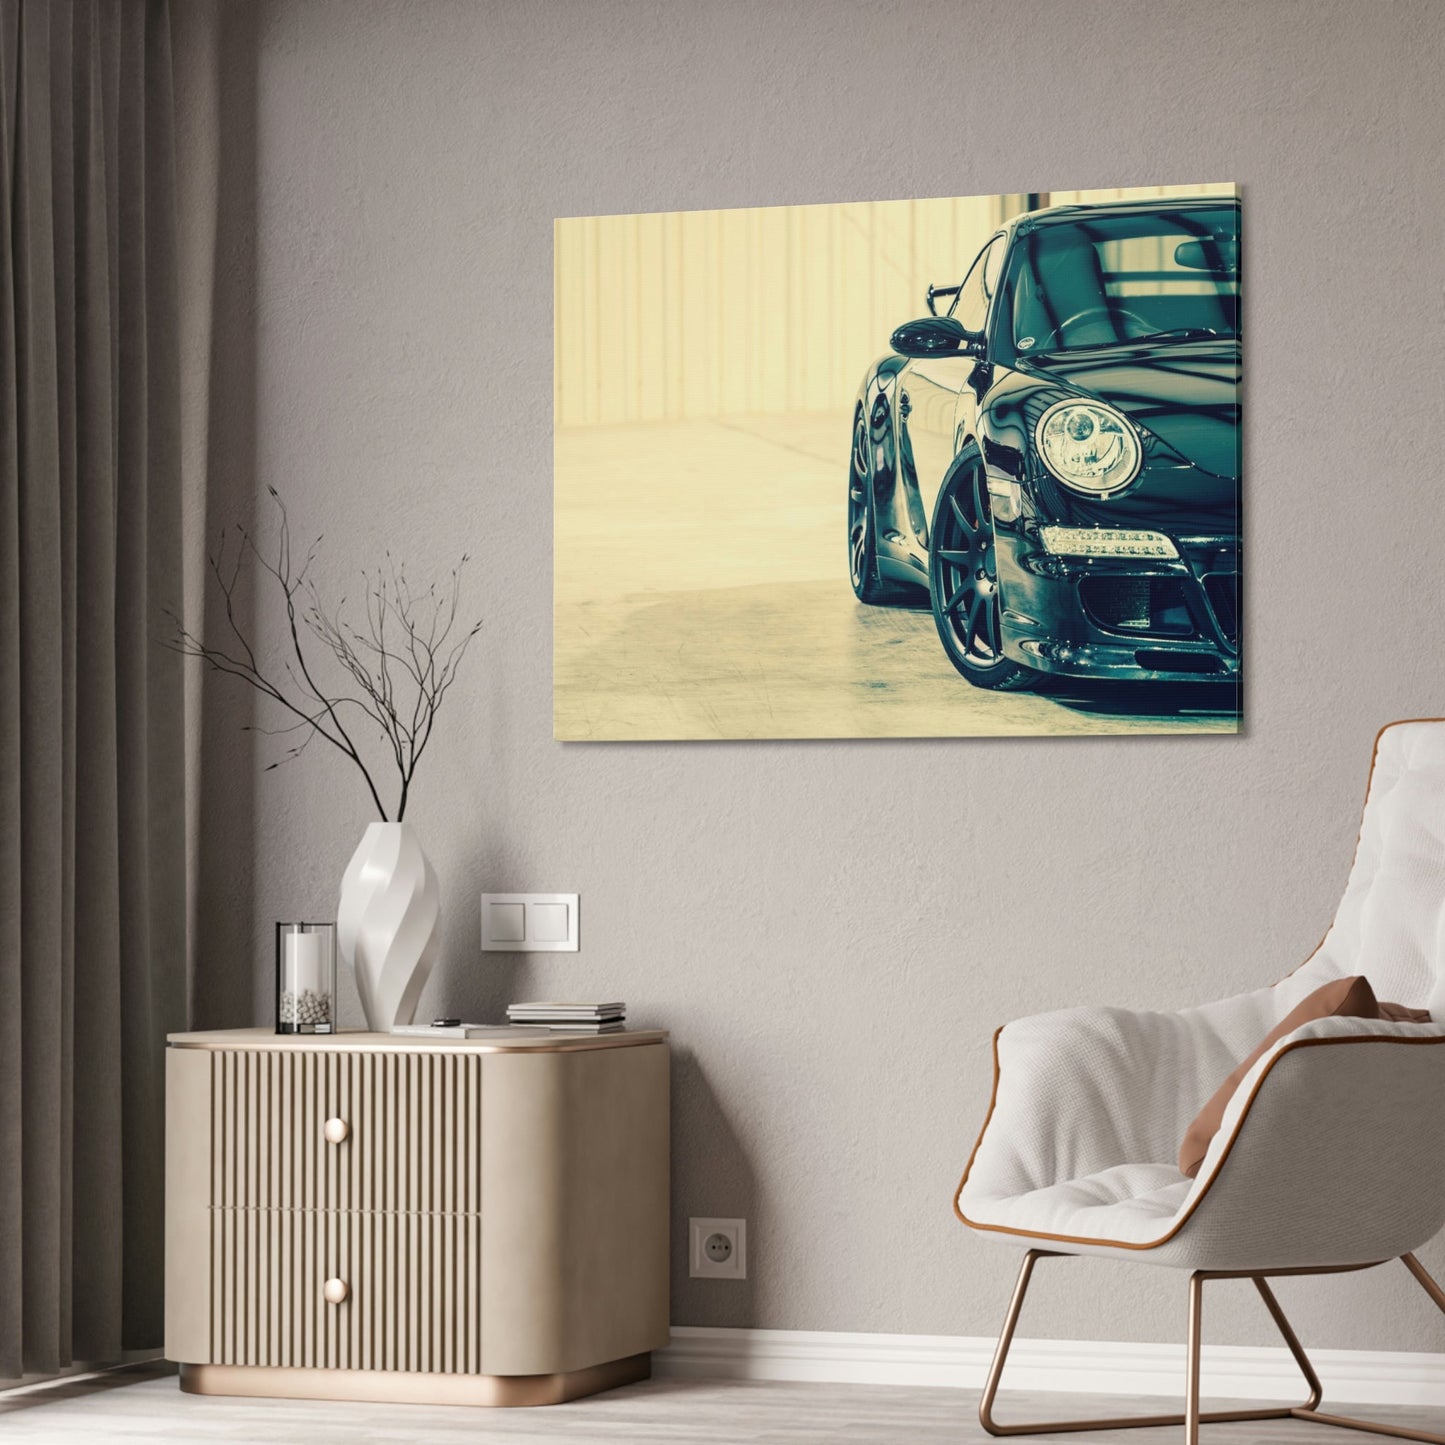 The Art of Speed: A Beautiful Framed Canvas & Poster Print of a Porsche in Motion